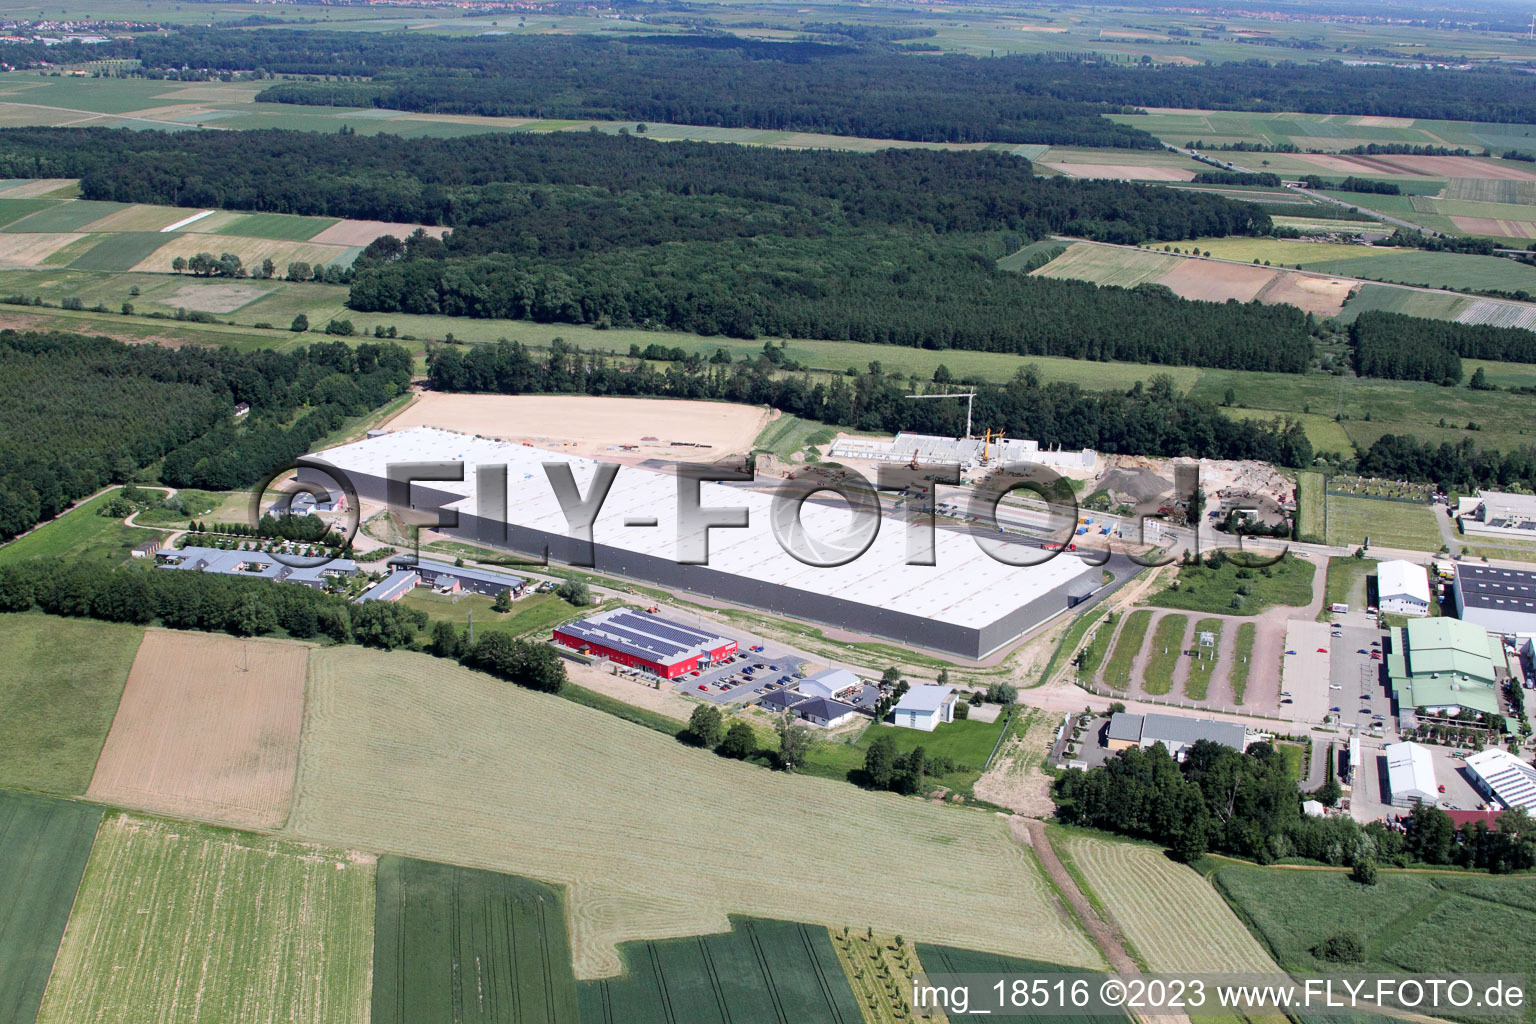 Coincidence logistics center in the district Minderslachen in Kandel in the state Rhineland-Palatinate, Germany seen from above